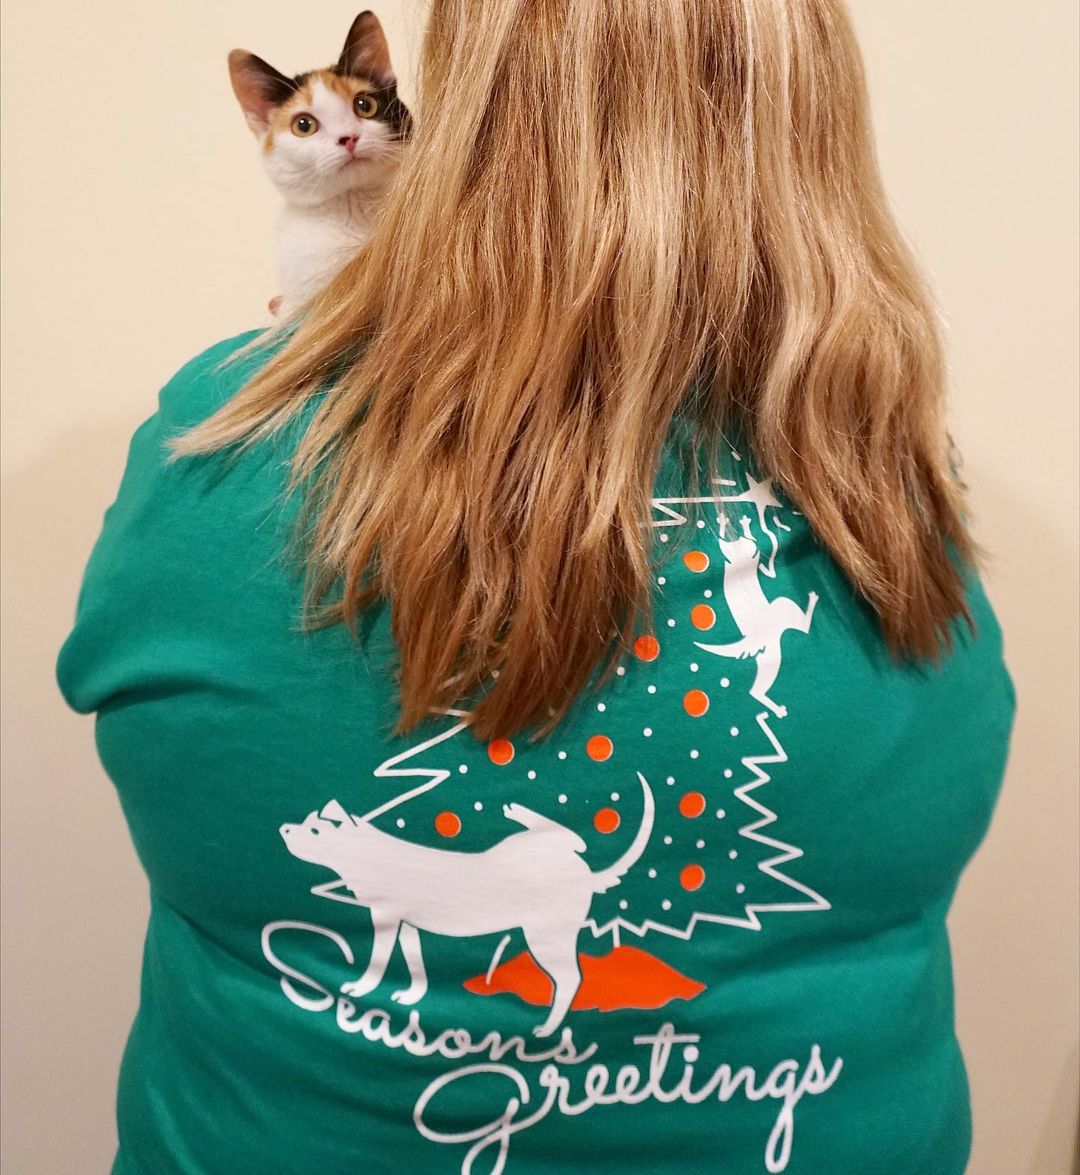 Laura CAN NOT contain her excitement any longer! Fresh off the press, it’s our limited edition Seasons Greetings t-shirts! We only have a limited quantity so get them fast, we will be selling them only in person at our office location. You’ll want to grab one soon so you can wear it all season long! 
Sizes range from: S-2XL
Price: $25.00